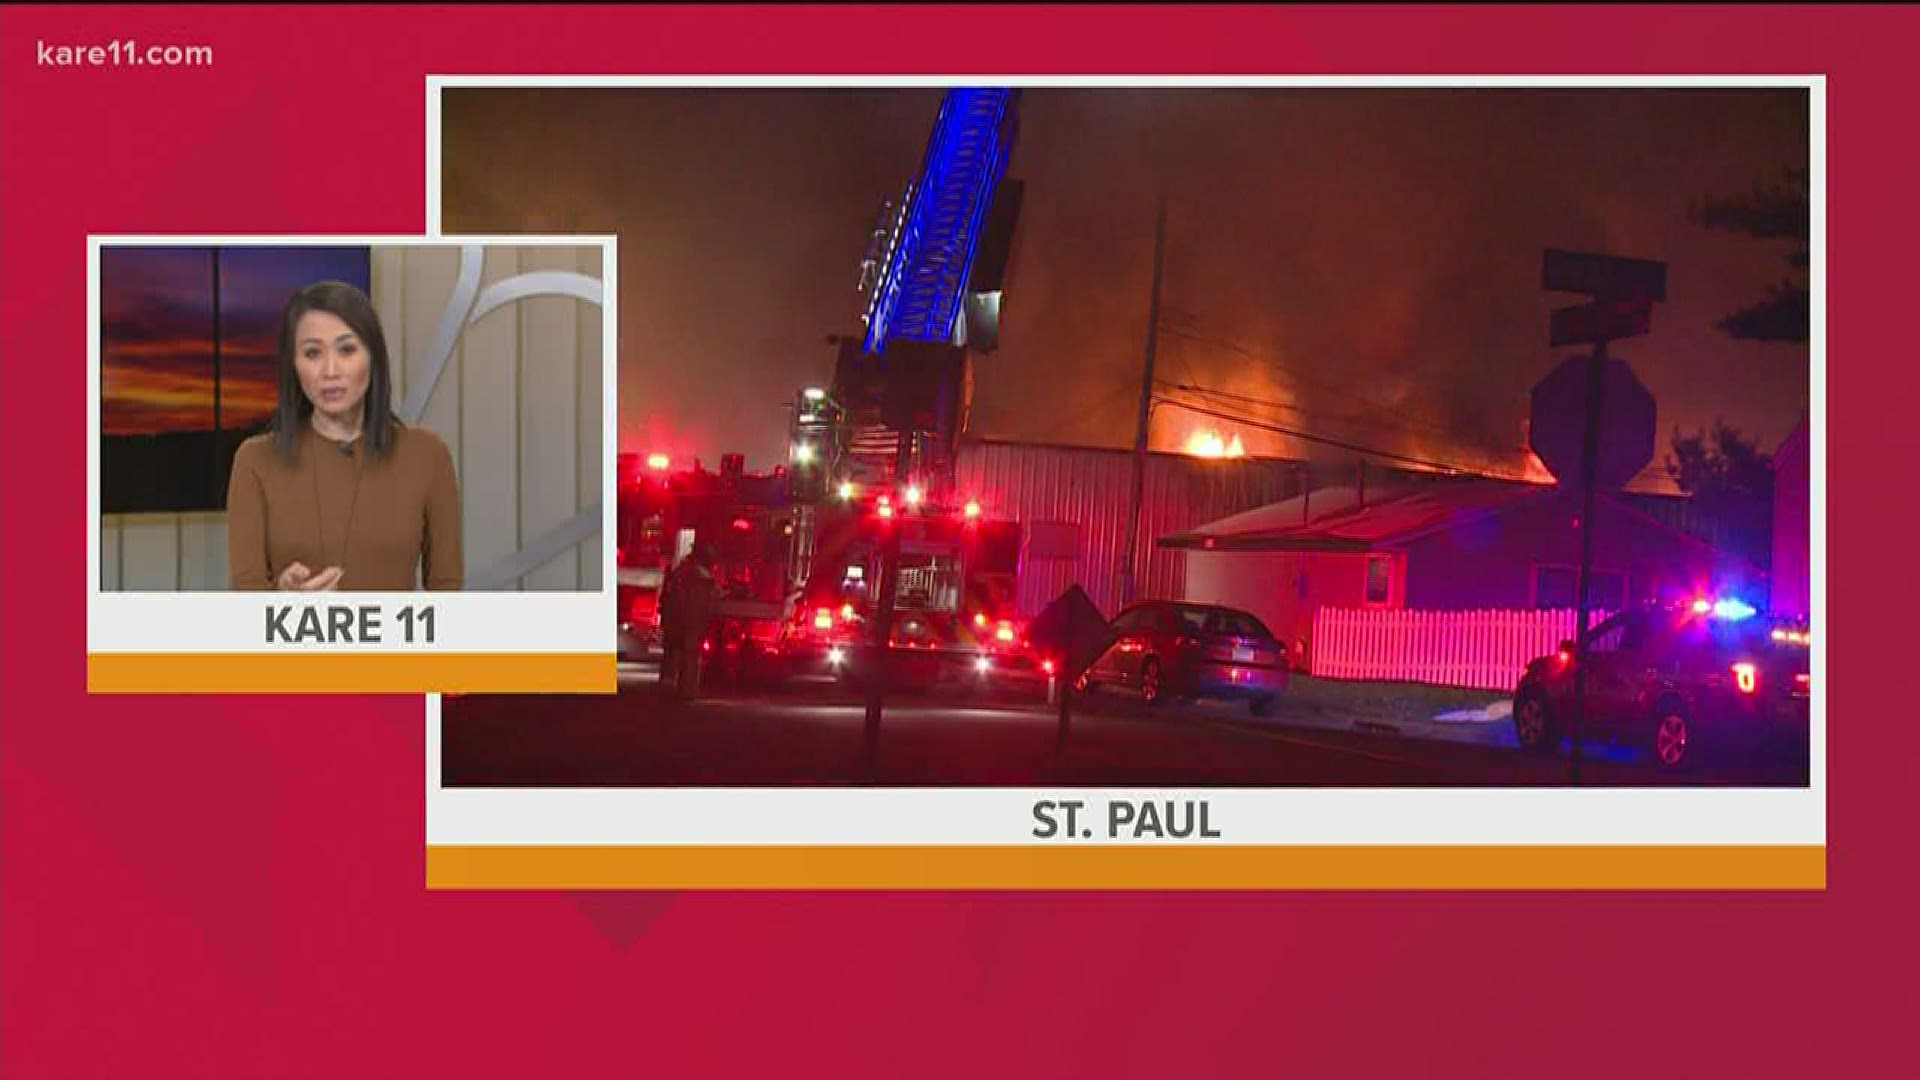 A fast-moving fire destroyed a business in St. Paul near the state fairgrounds overnight Tuesday.